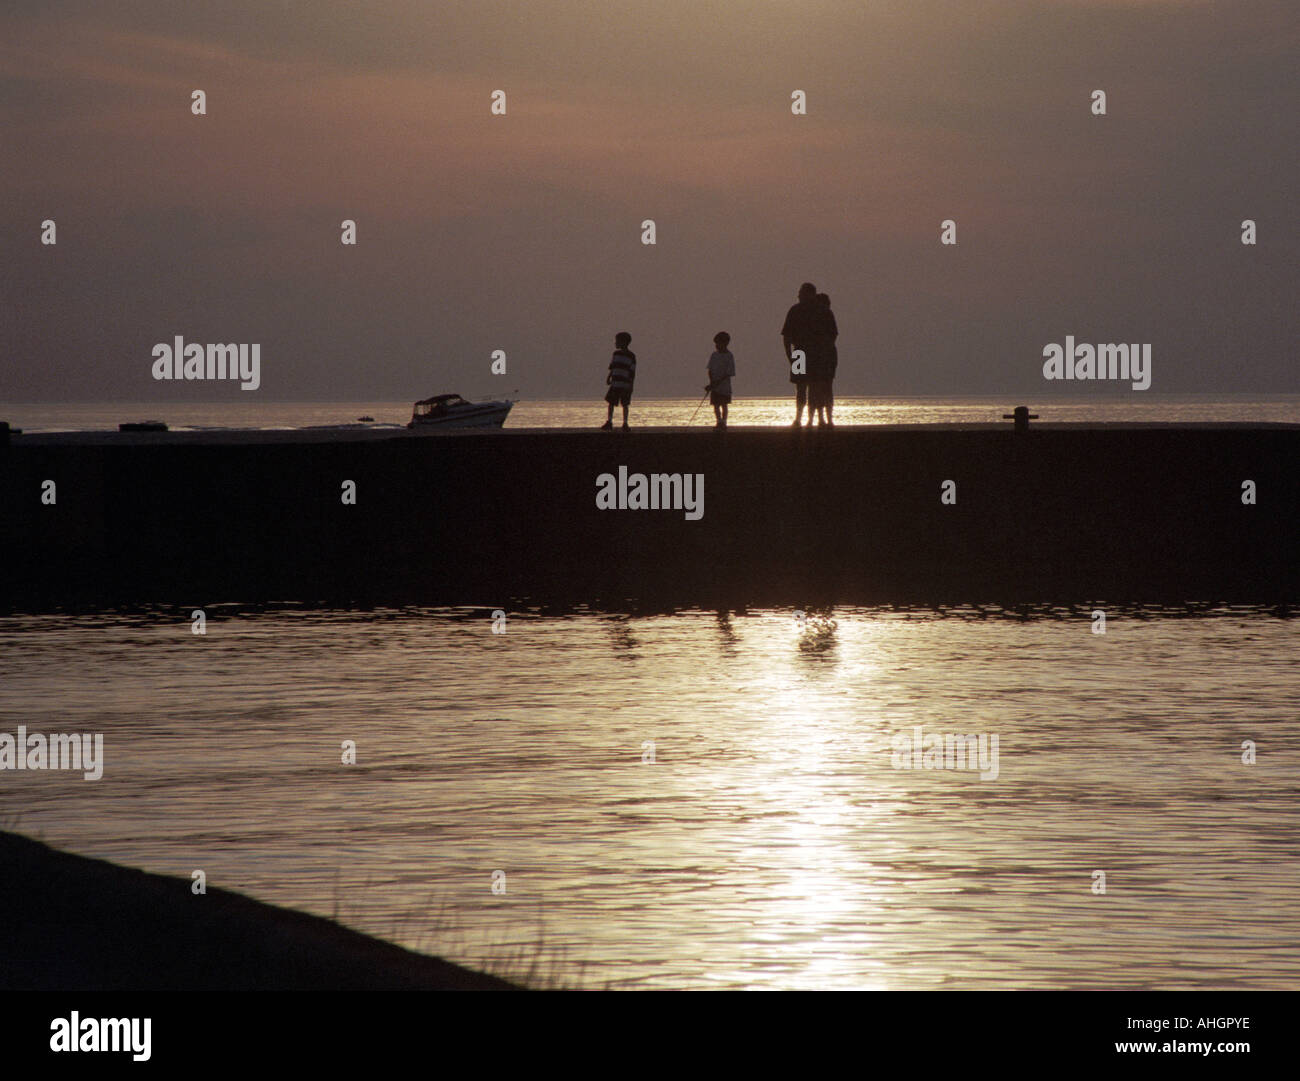 Family in Silhouette on Lake Huron Pier at Sunset Ontario Canada Stock Photo